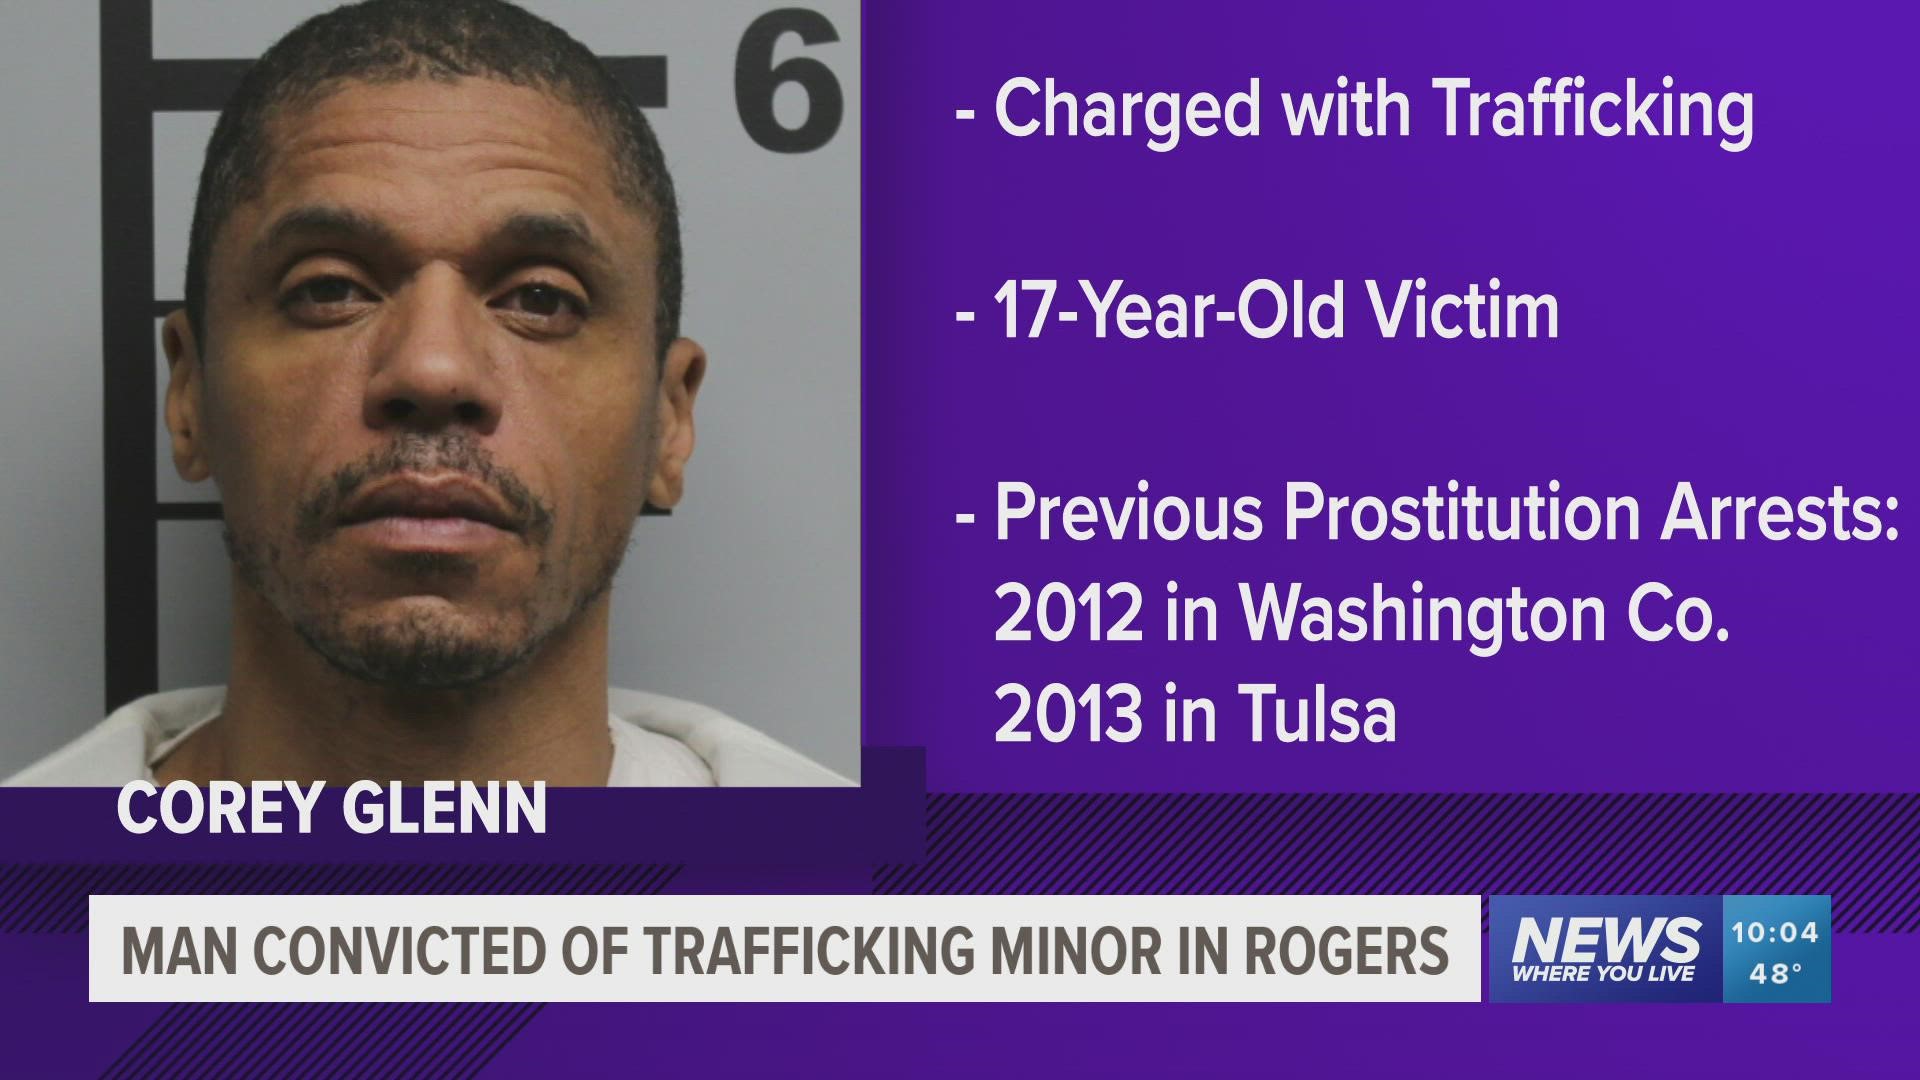 A man has been convicted for running a prostitution ring out of a home in Rogers, Ark.